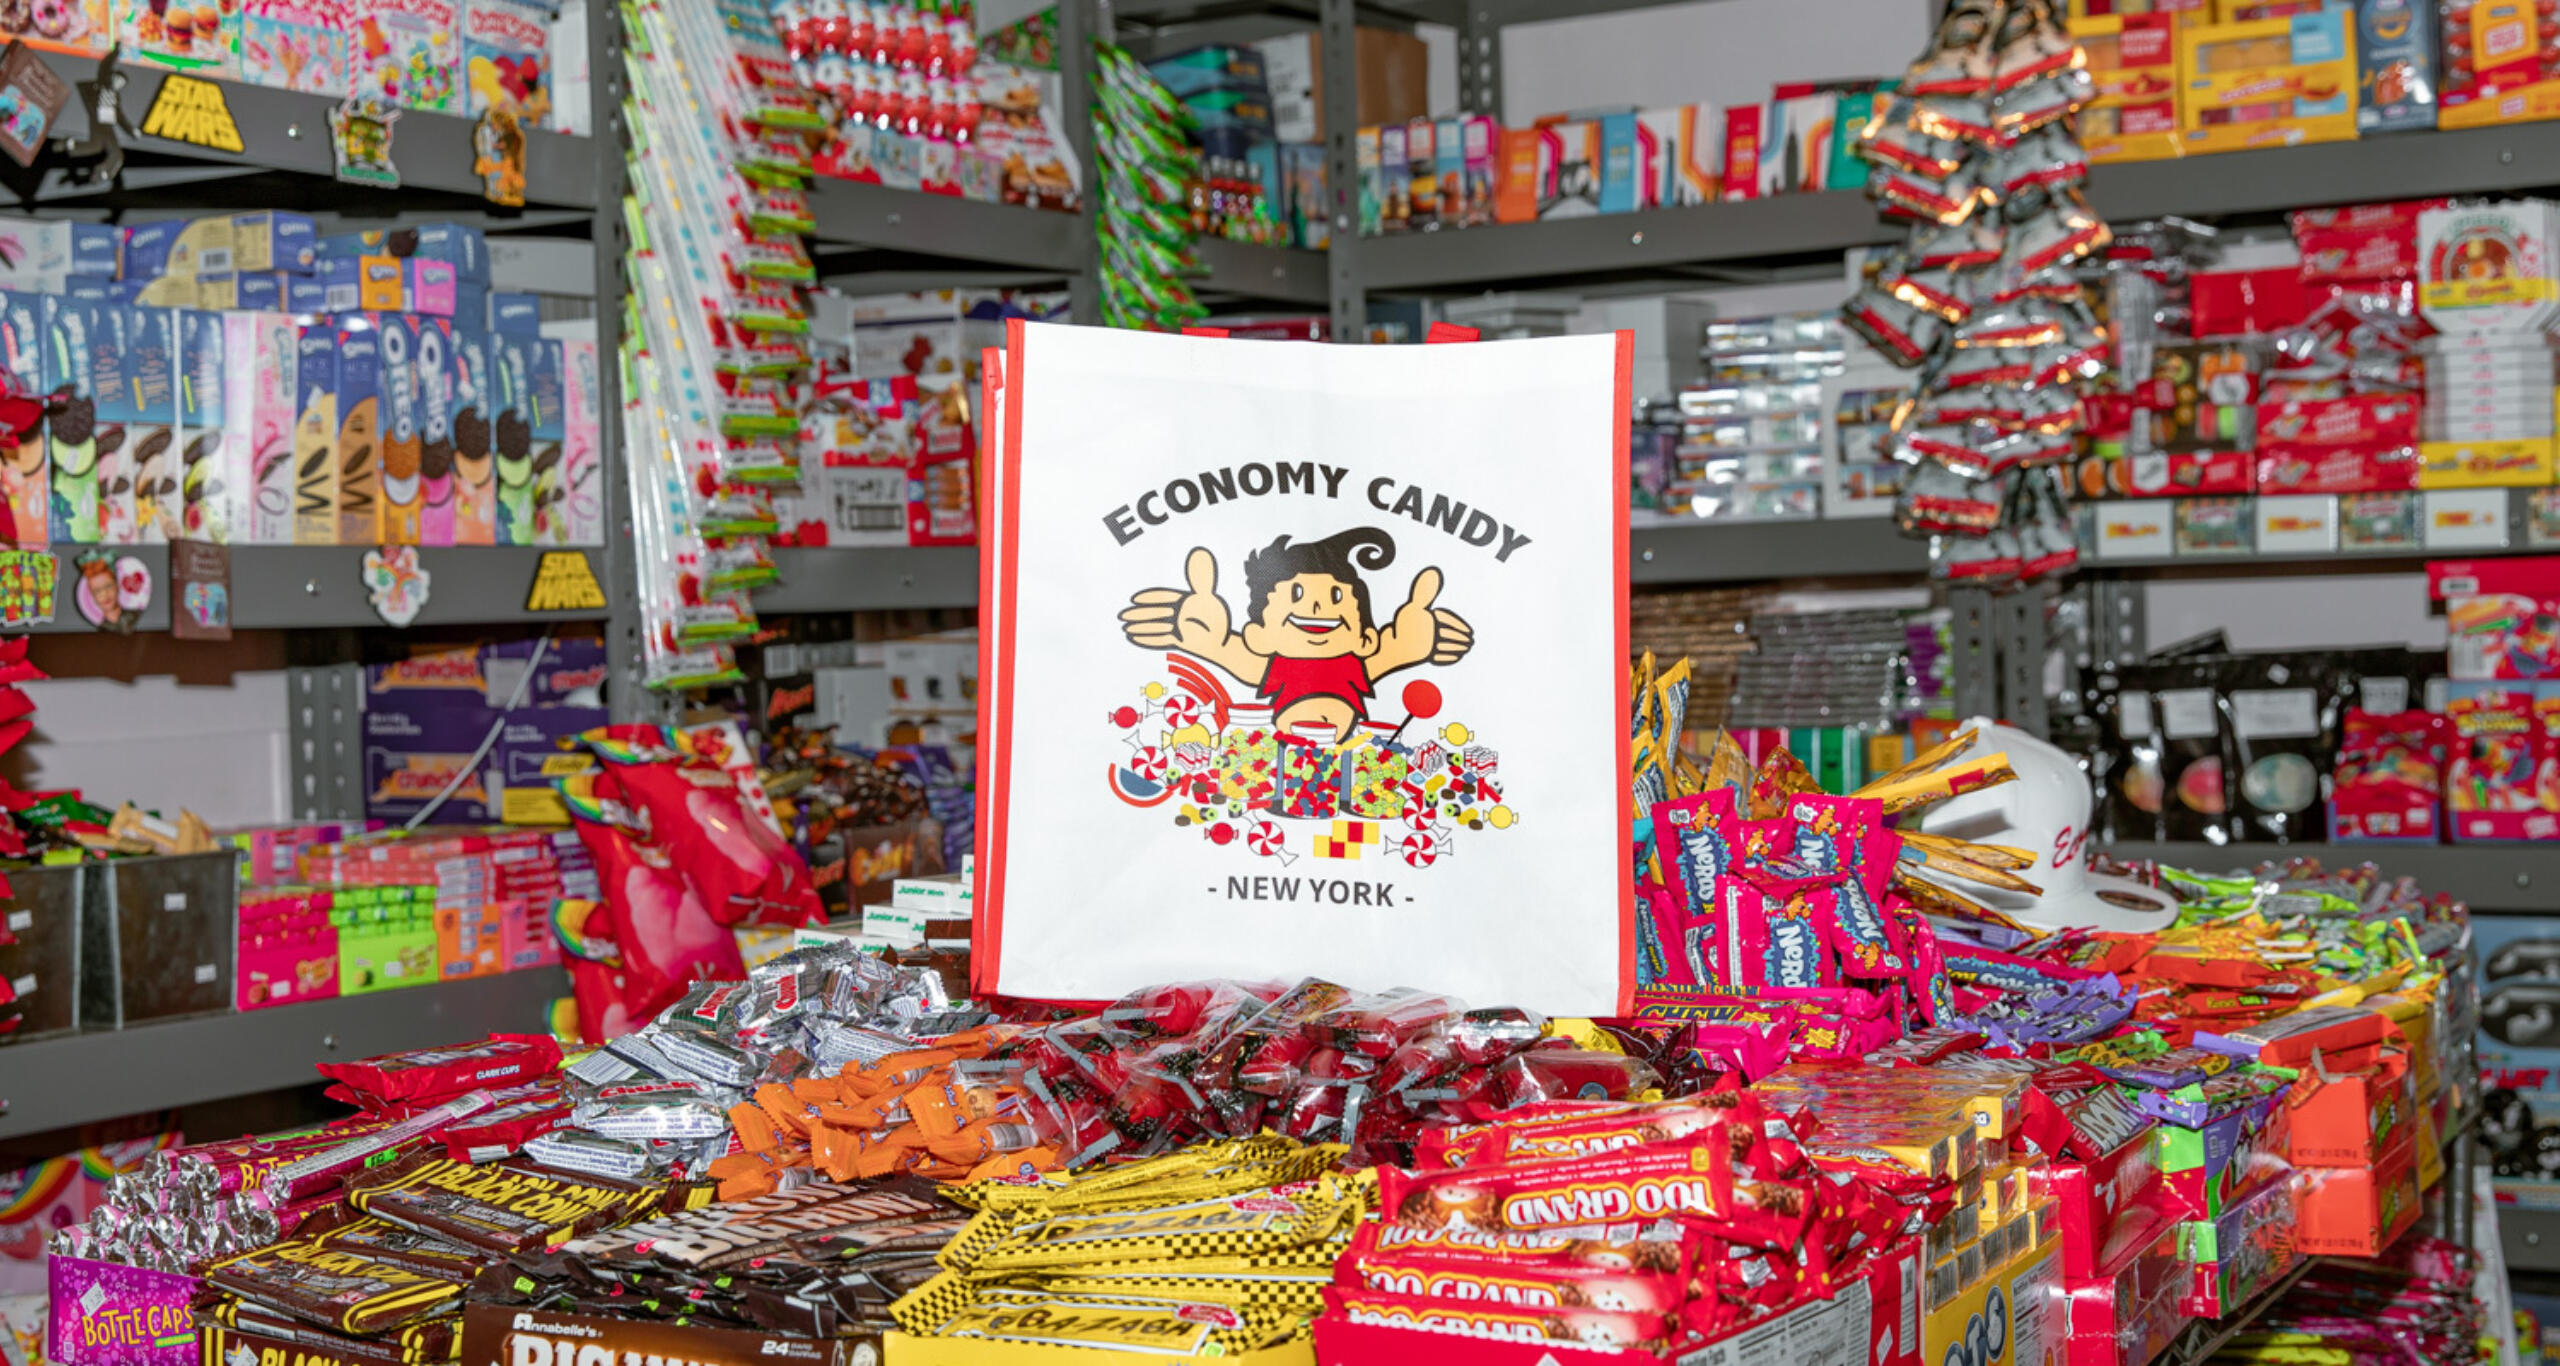 Inside Economy Candy store with hundreds of retail candies on shelves and a table